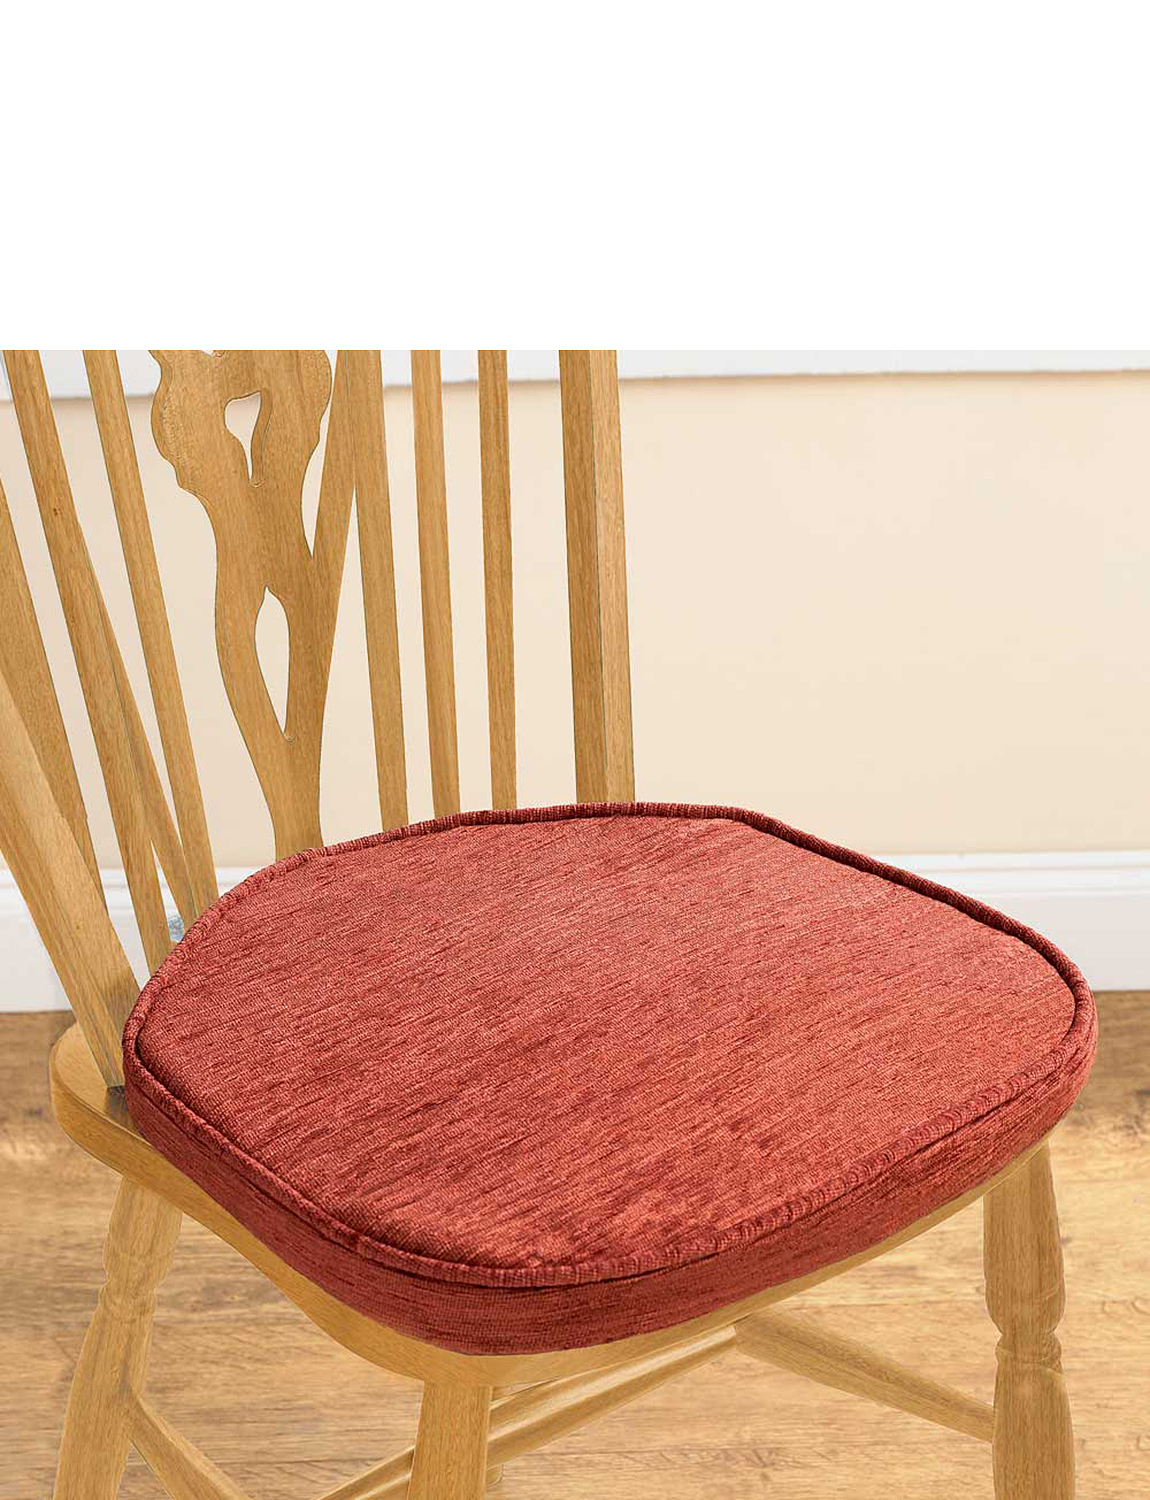 Dining Chair Seat Pads Australia - Seat Cushion Covers For Chairs ...